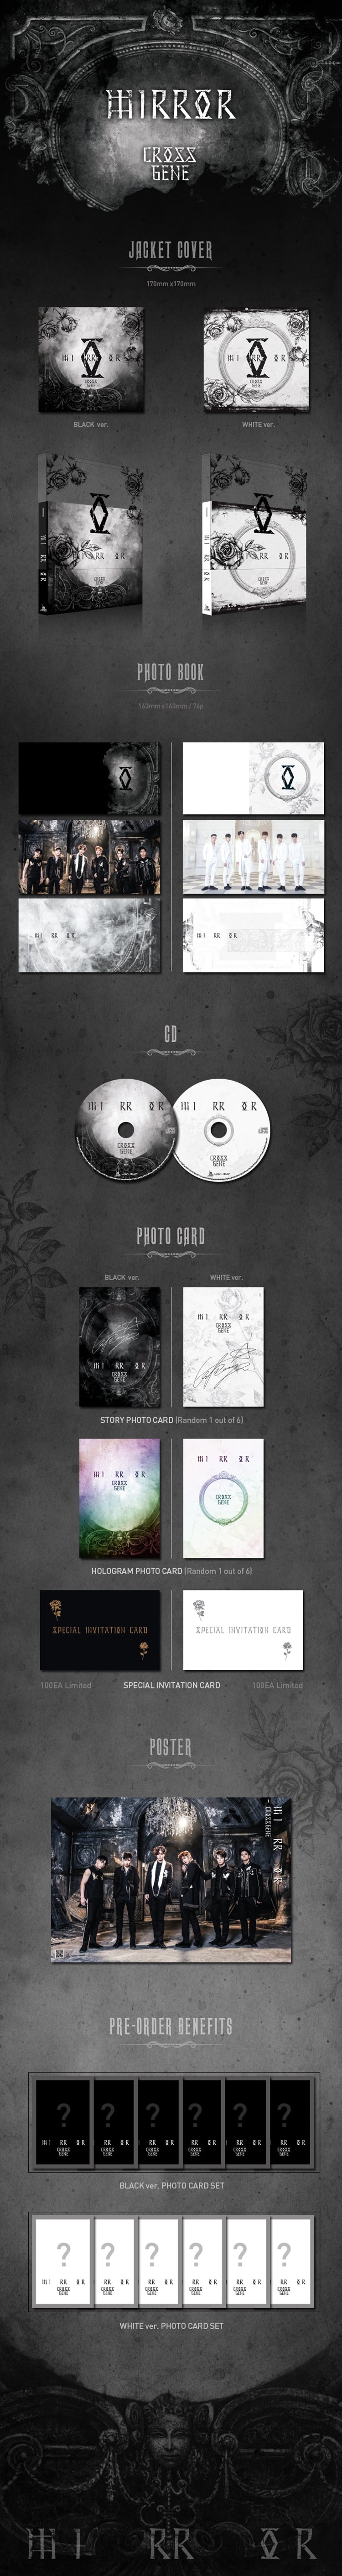 1 CD
1 Photo Book (76 pages)
1 Photo Card